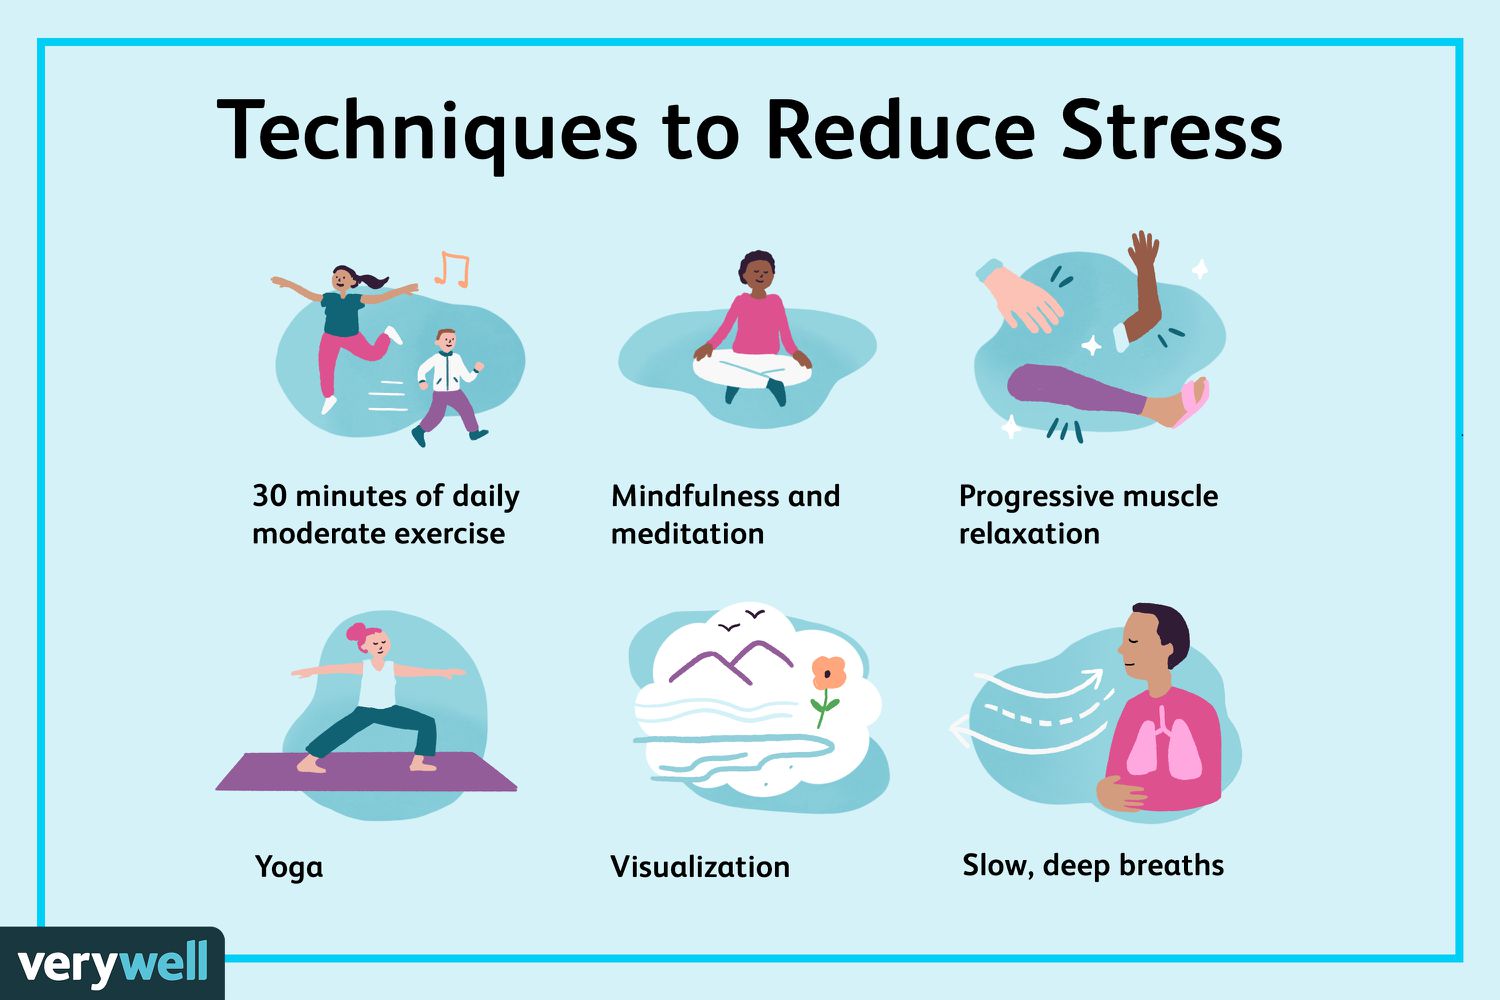 How to reduce stress-related muscle tension before bedtime?